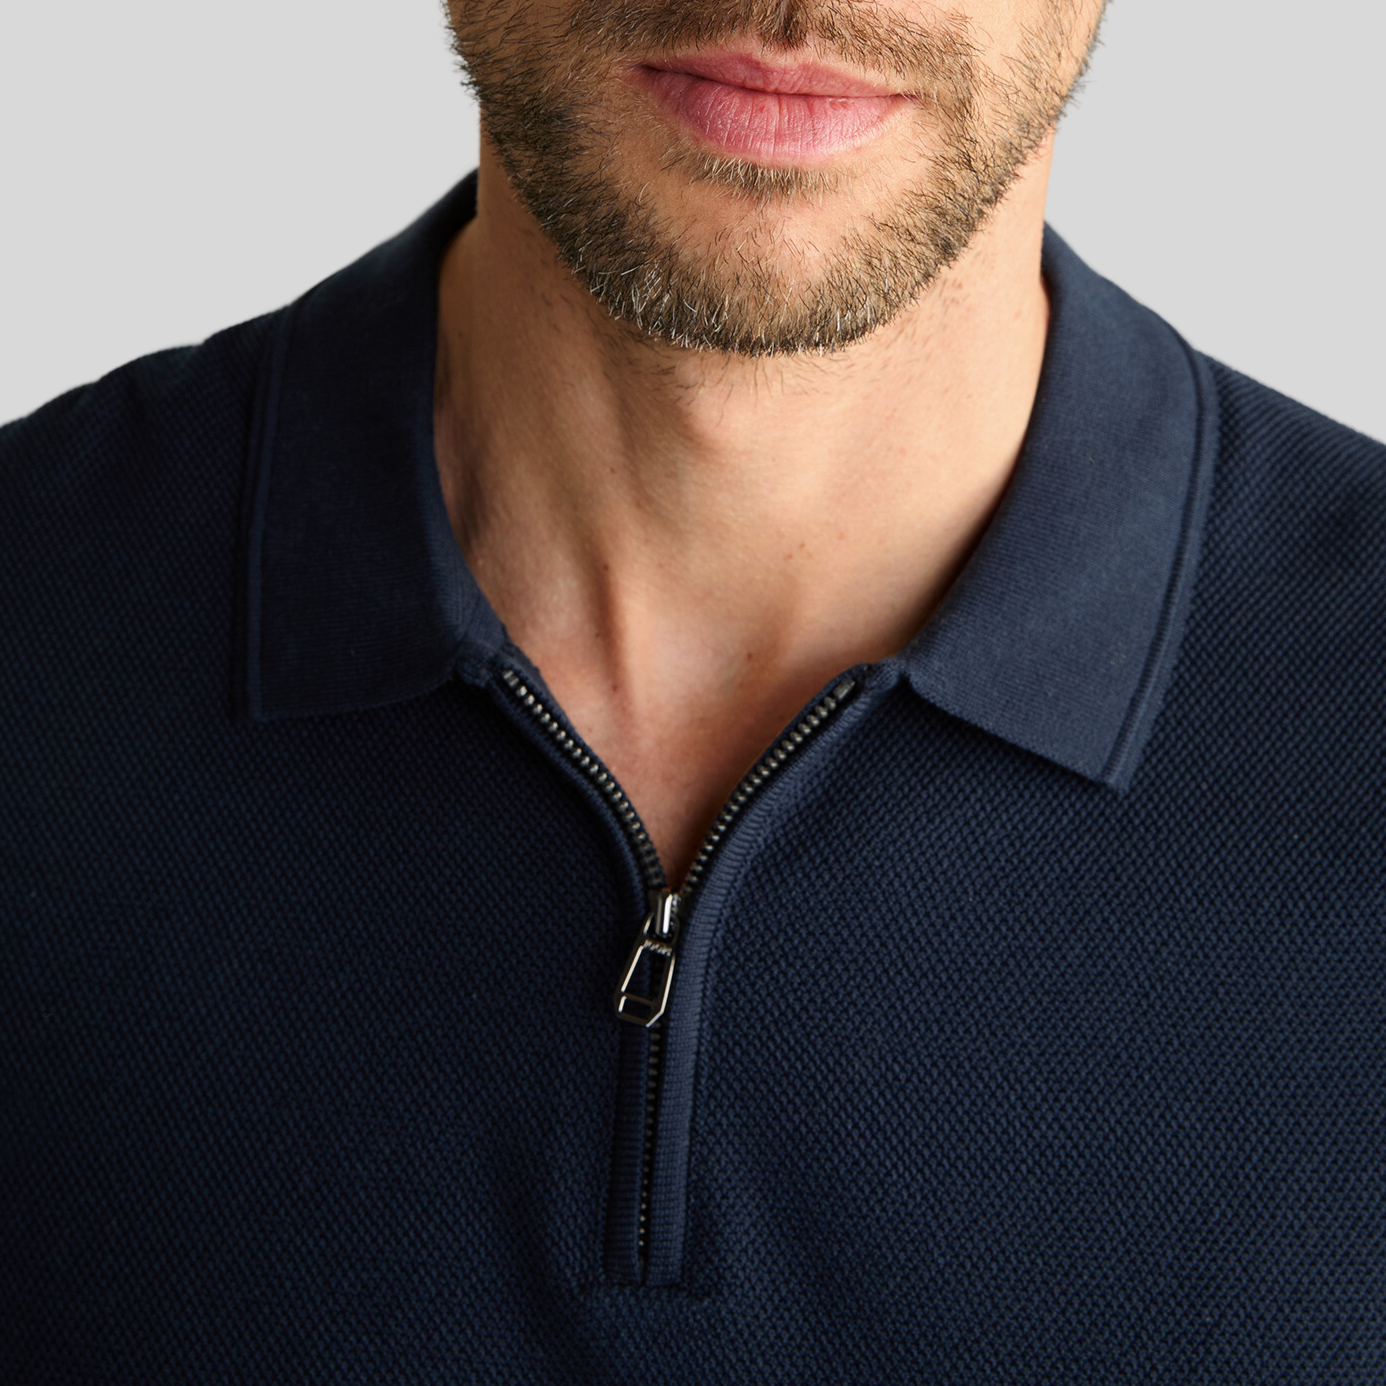 Gotstyle Fashion - Joop! Polos Textured Knit Zip Polo - Navy